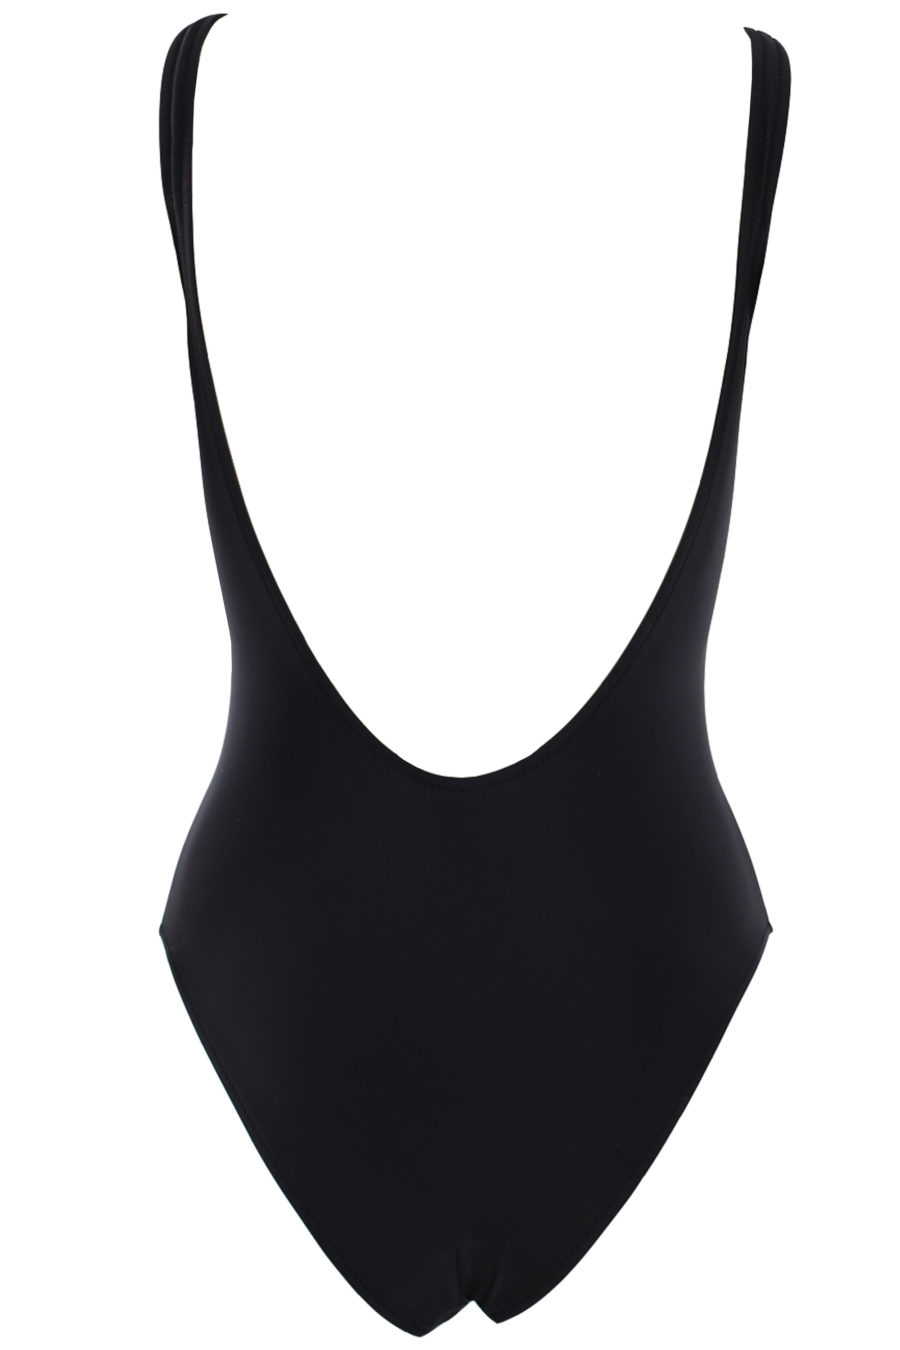 Black one-piece swimming costume with large white logo - IMG 0623